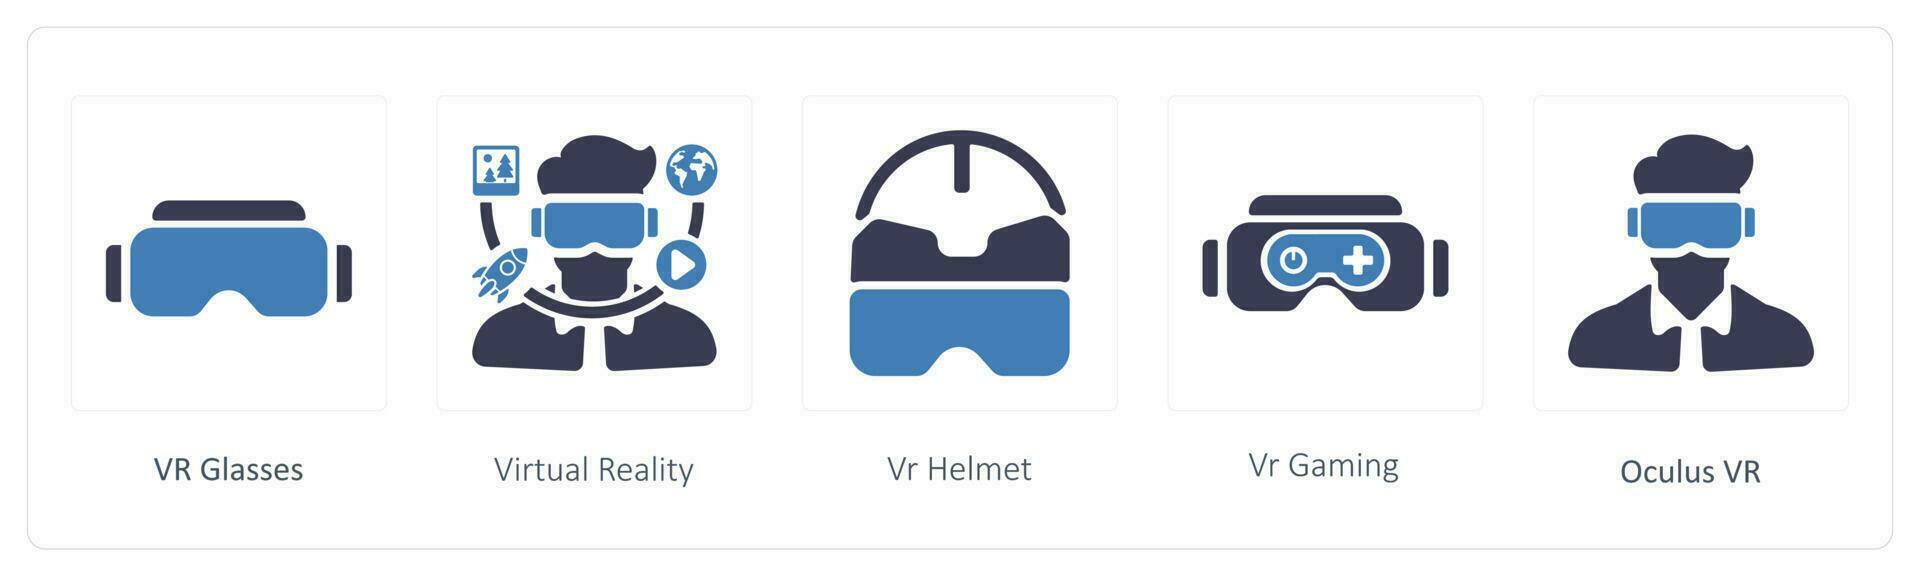 Virtual Reality icons such as vr glasses, virtual reality and Vr Helmet vector